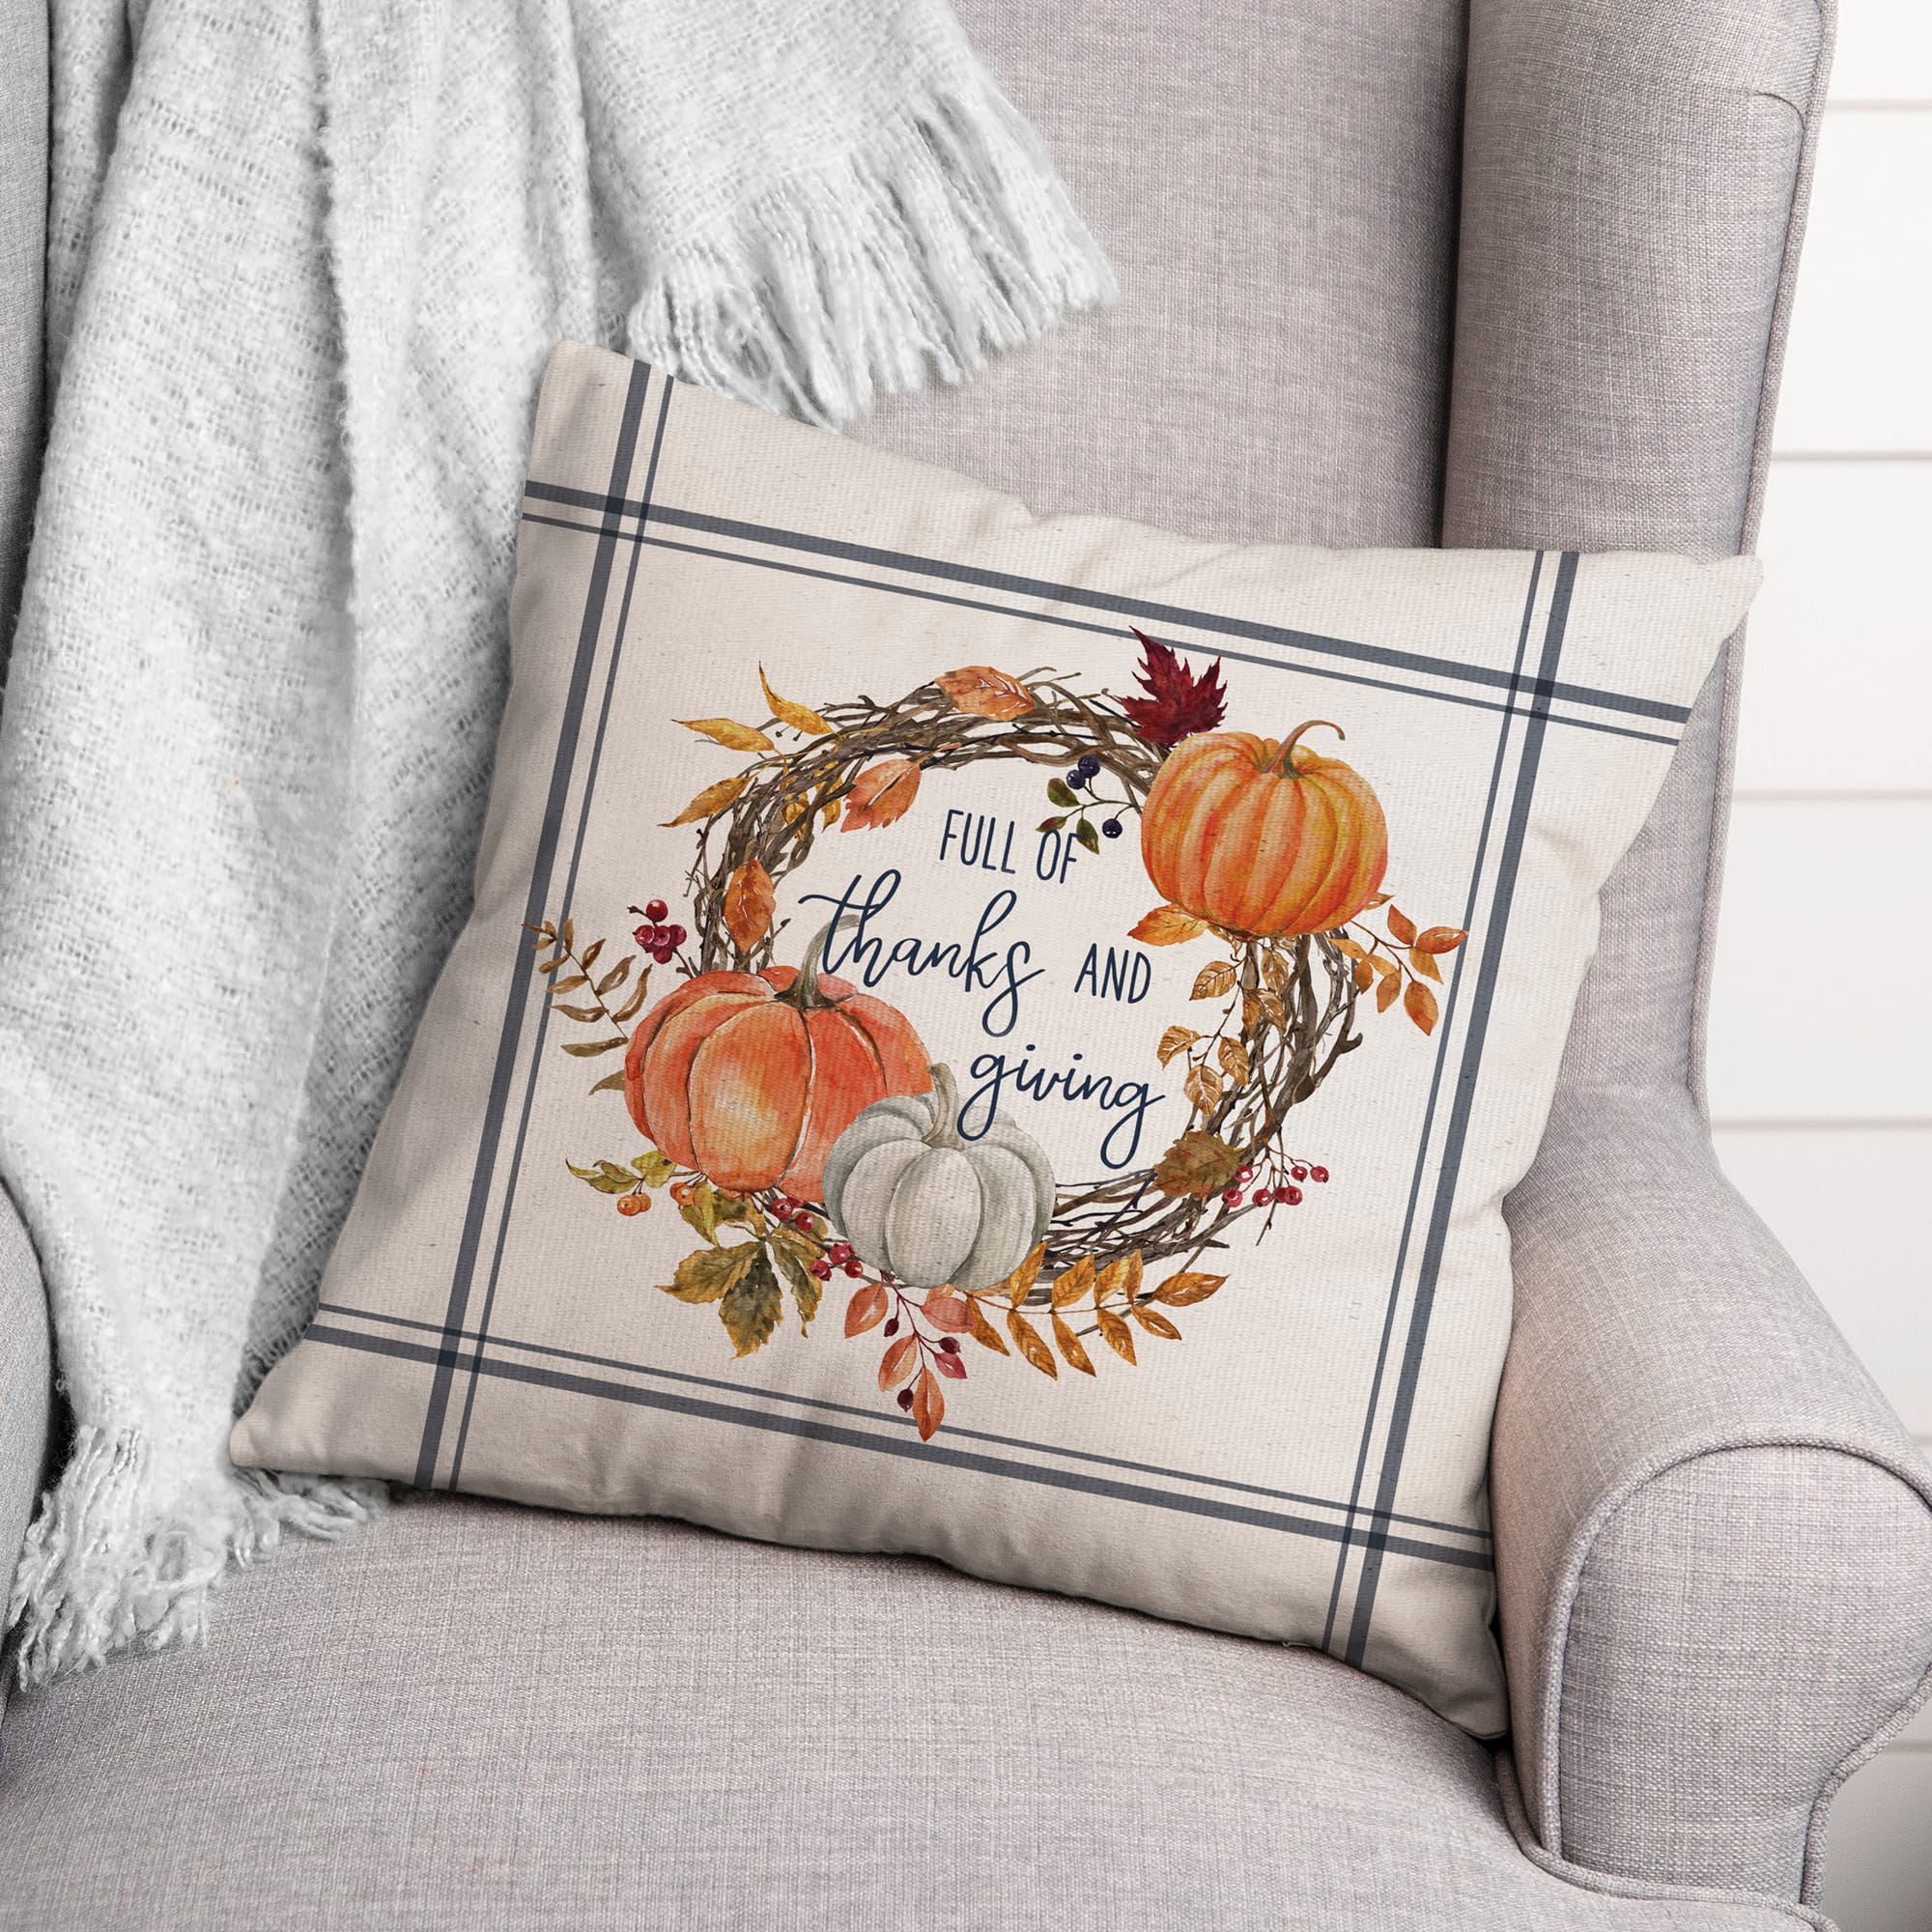 Thanks And Giving Fall Wreath Throw Pillow